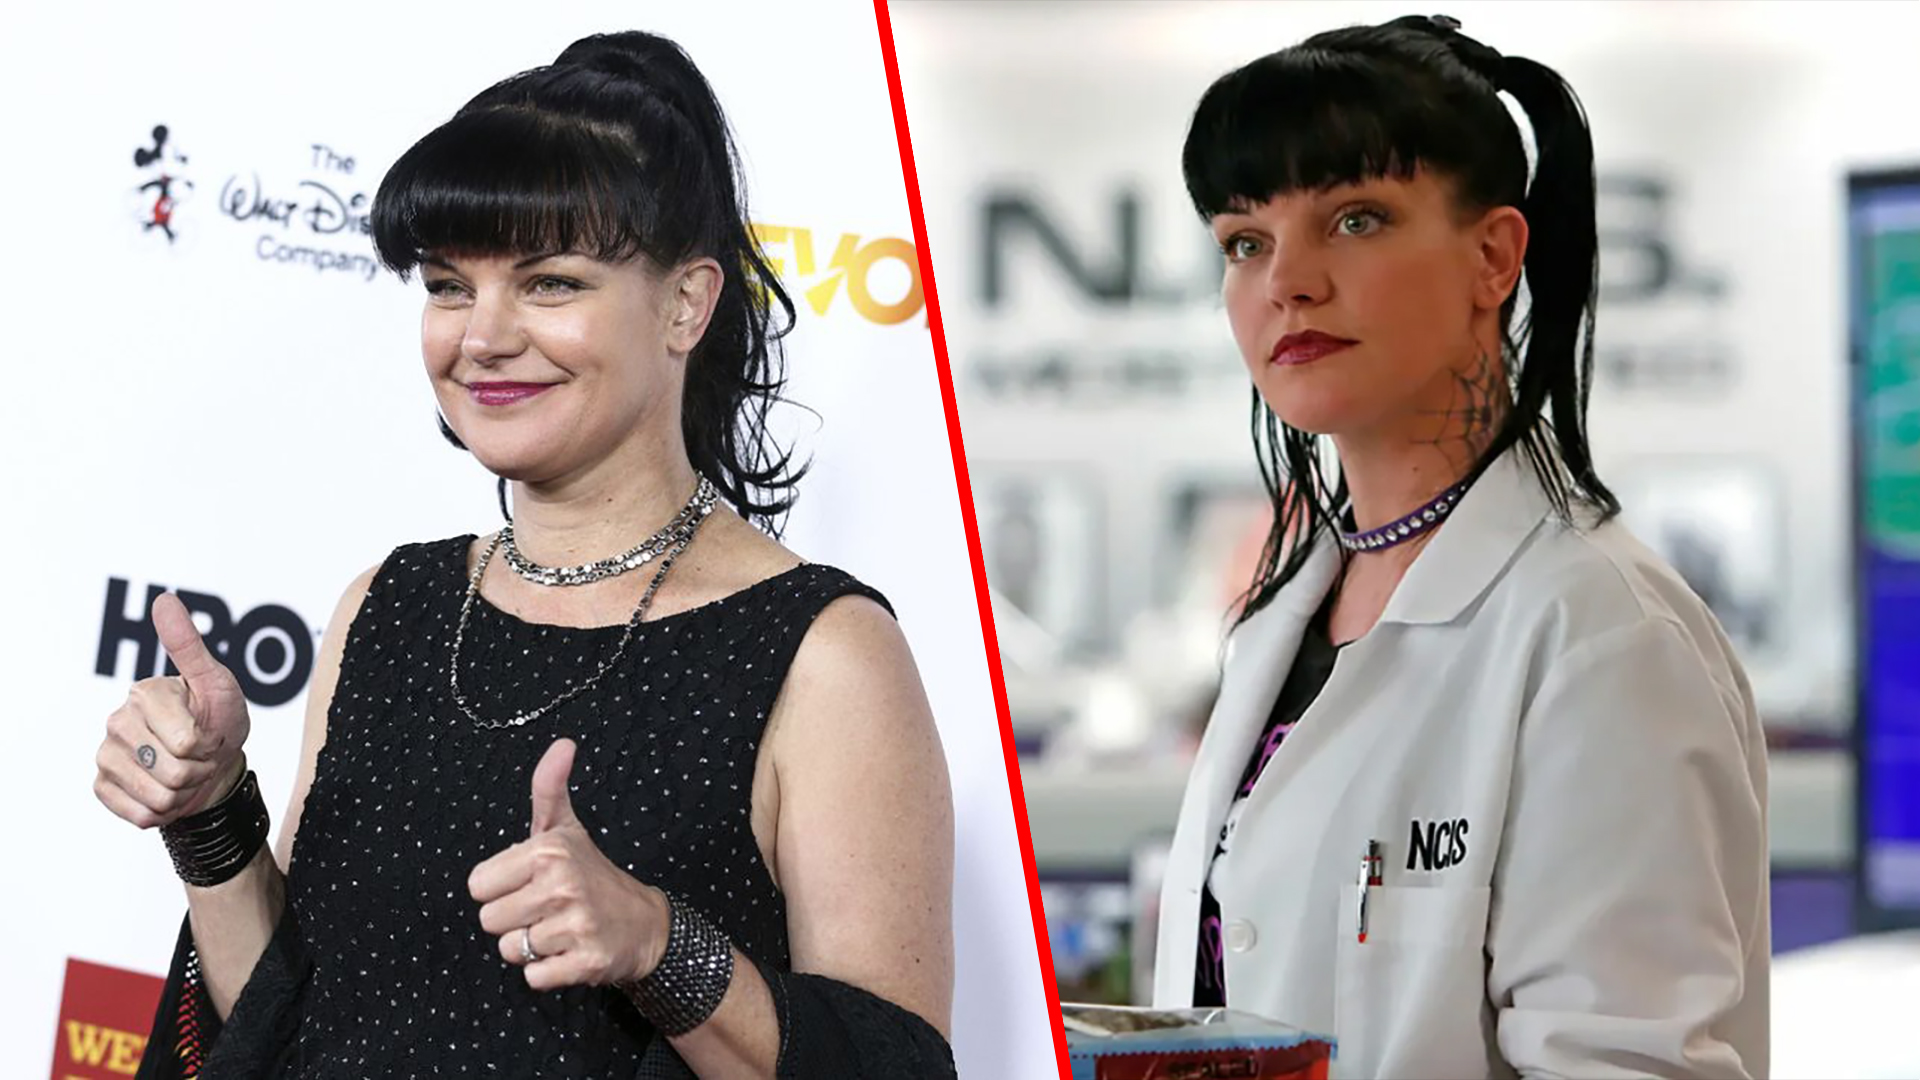 NCIS Pauley Perrette Received Support From Fans After Speaks About a Family Loss